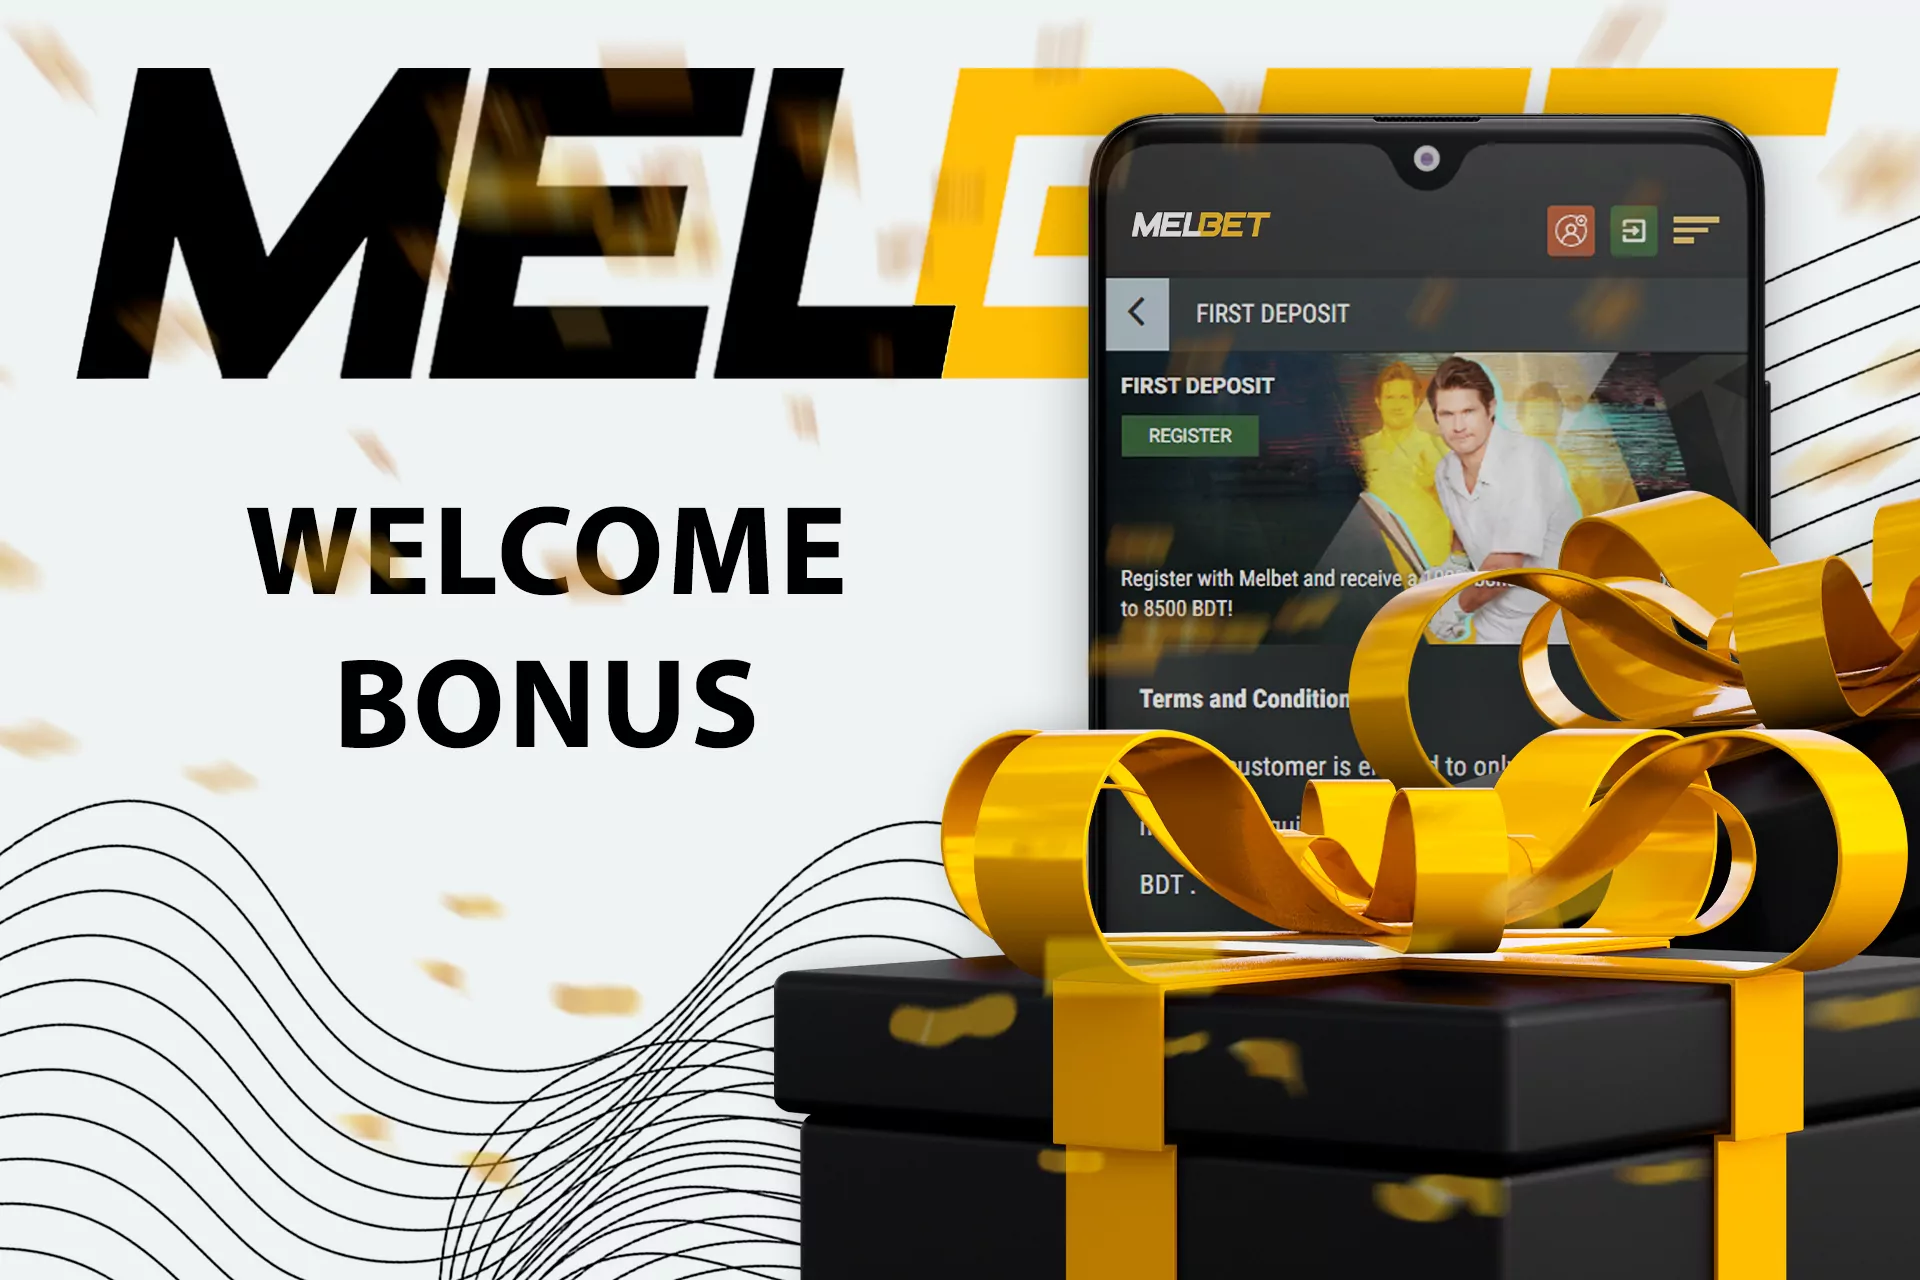 Get a welcome bonus of up to 175,000 BDT and 290 free spins when signing up with Melbet.